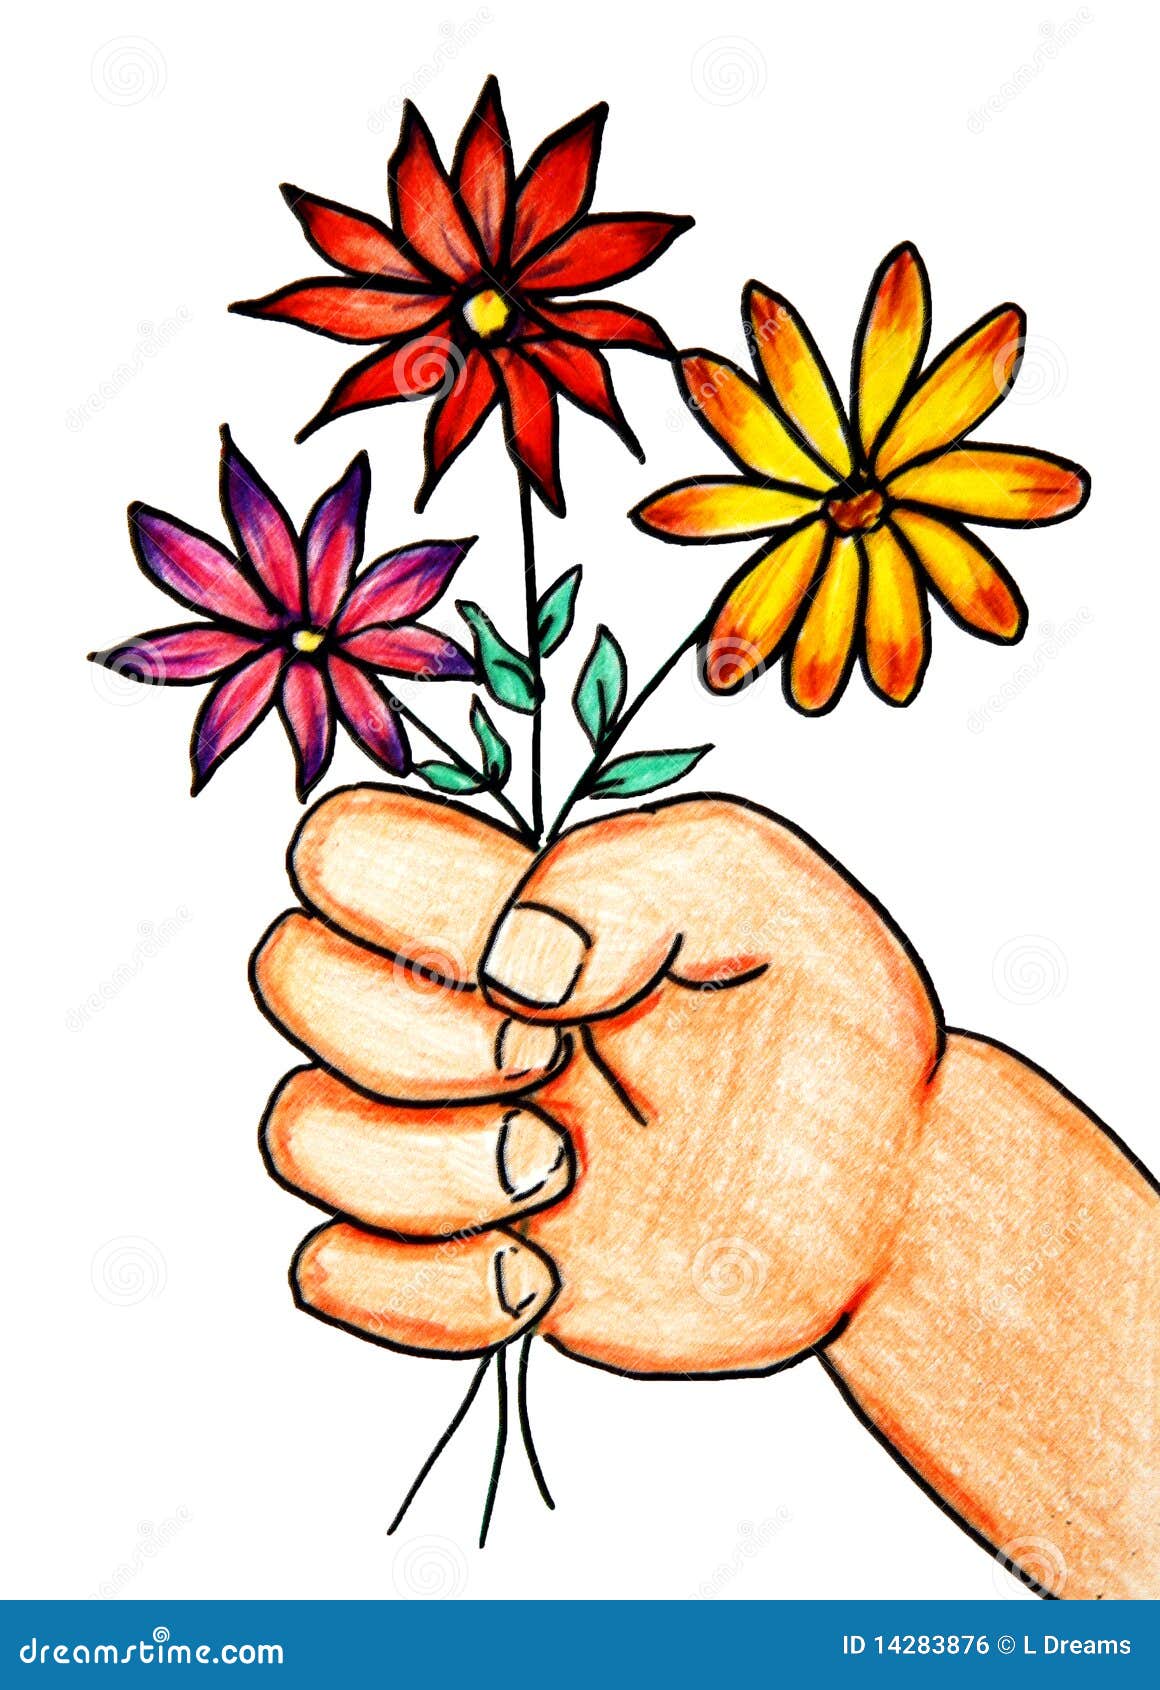 clipart giving flowers - photo #12